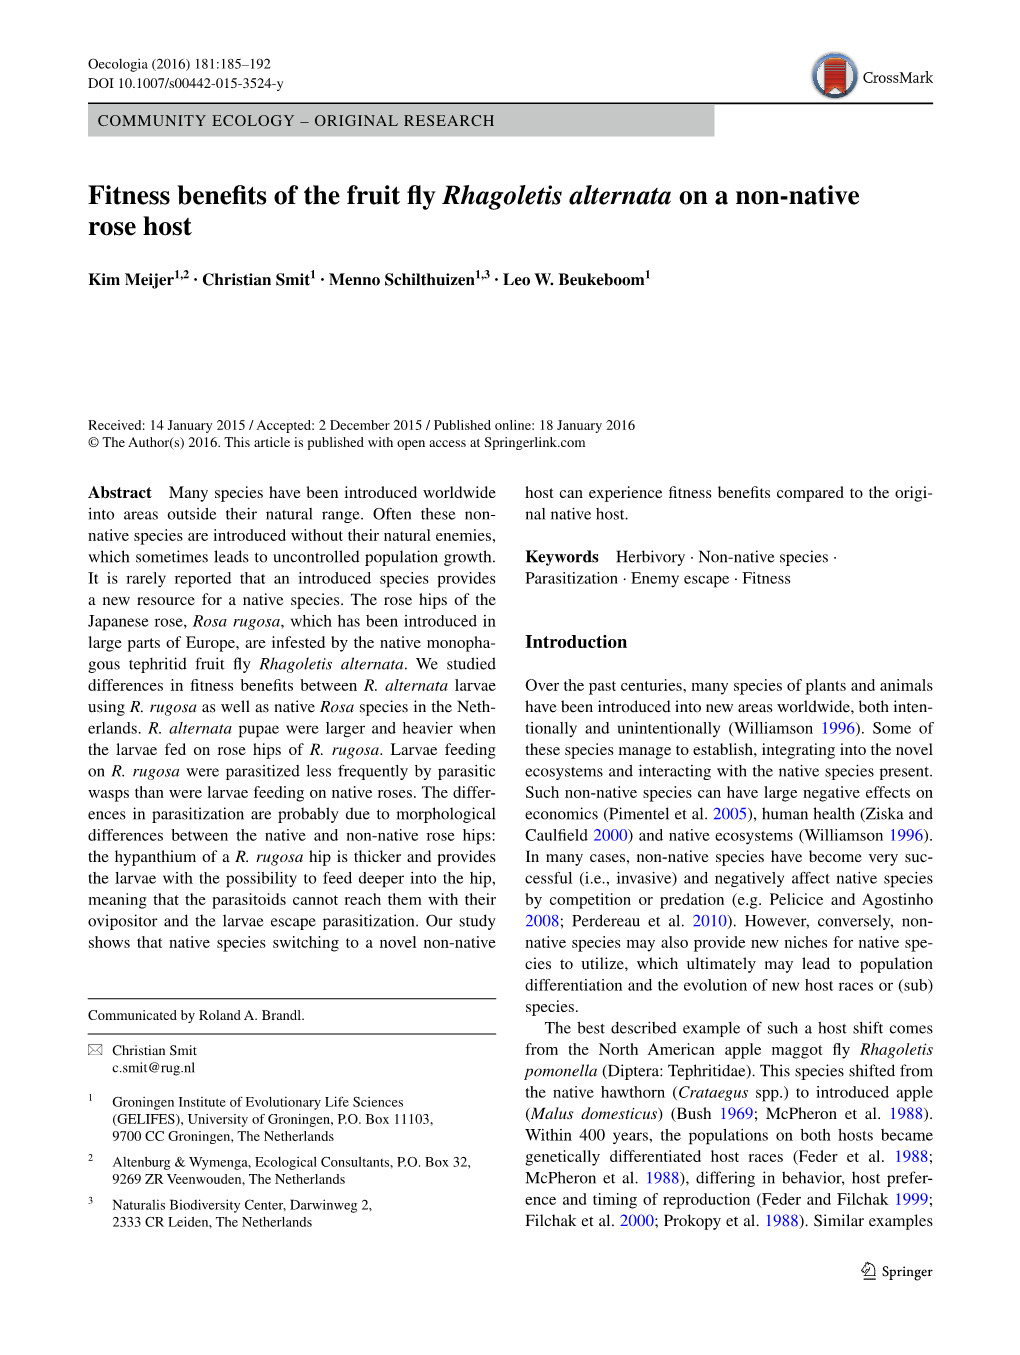 Fitness Benefits of the Fruit Fly Rhagoletis Alternata on a Non-Native Rose Host